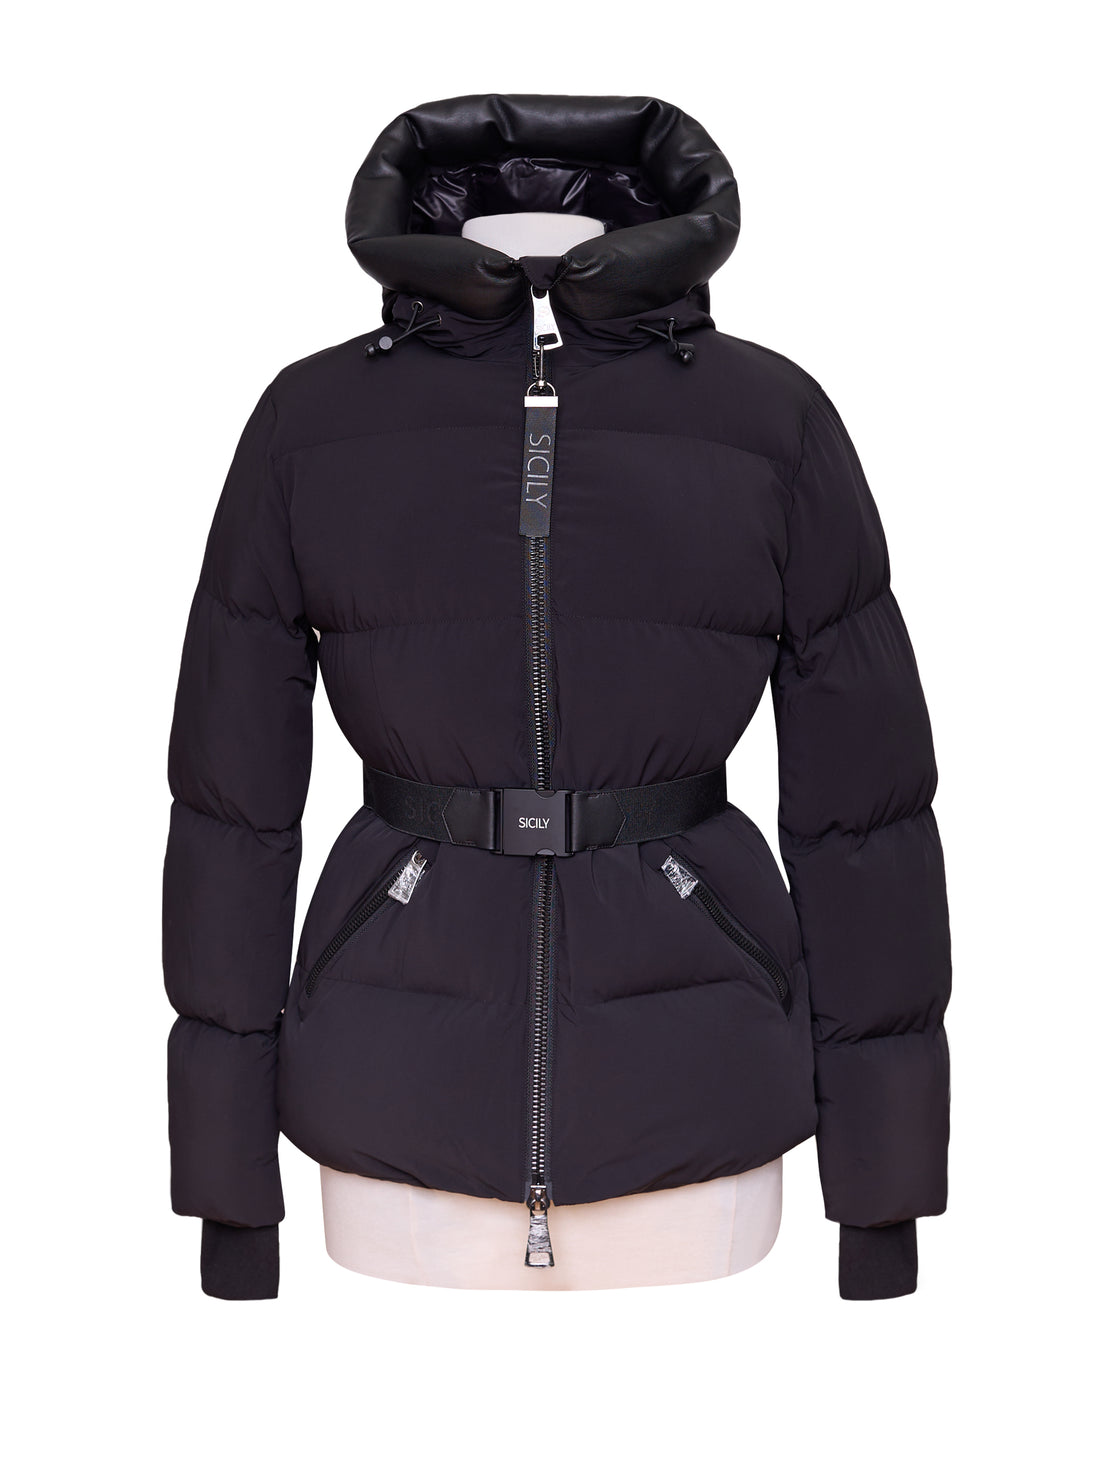 LADIES BELTED PUFFER